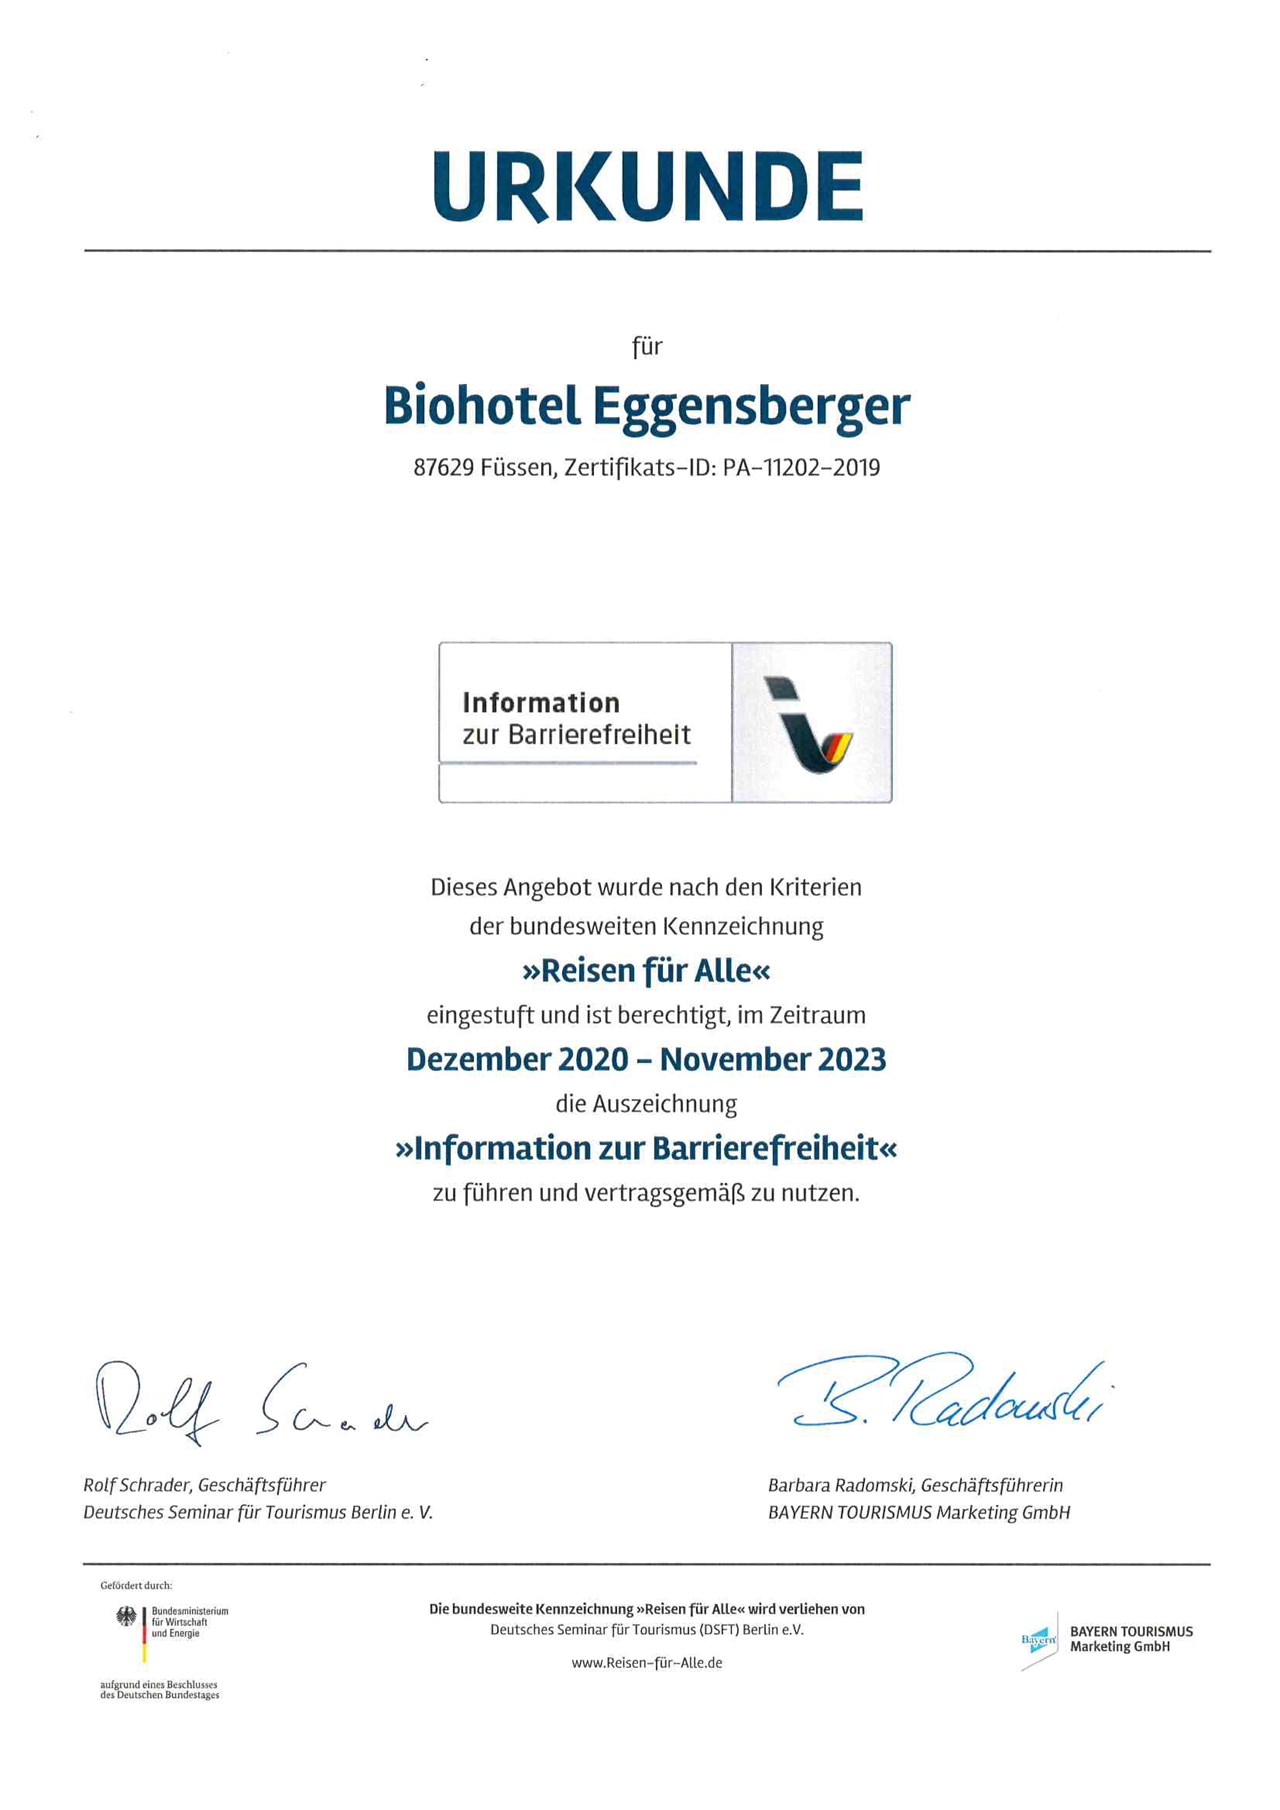 Biohotel Eggensberger Evidence certificates Travel for everyone: barrier-free rooms